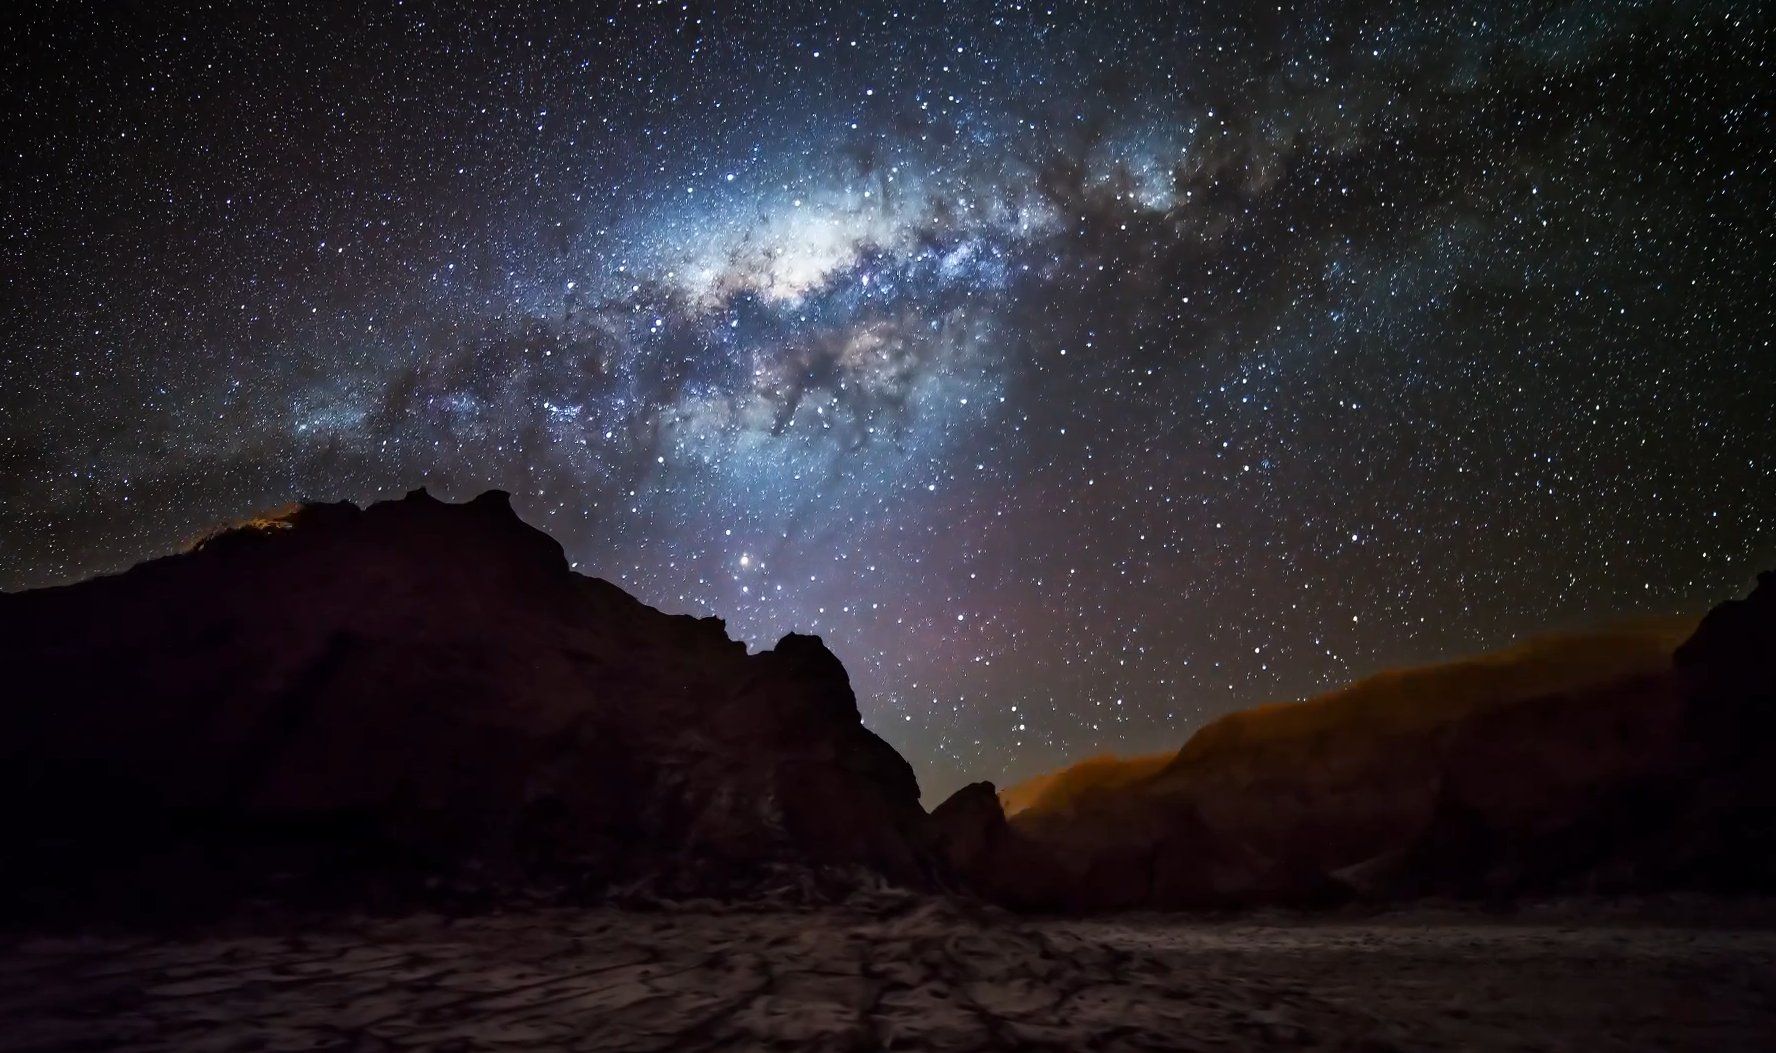 The night skies in Chile.